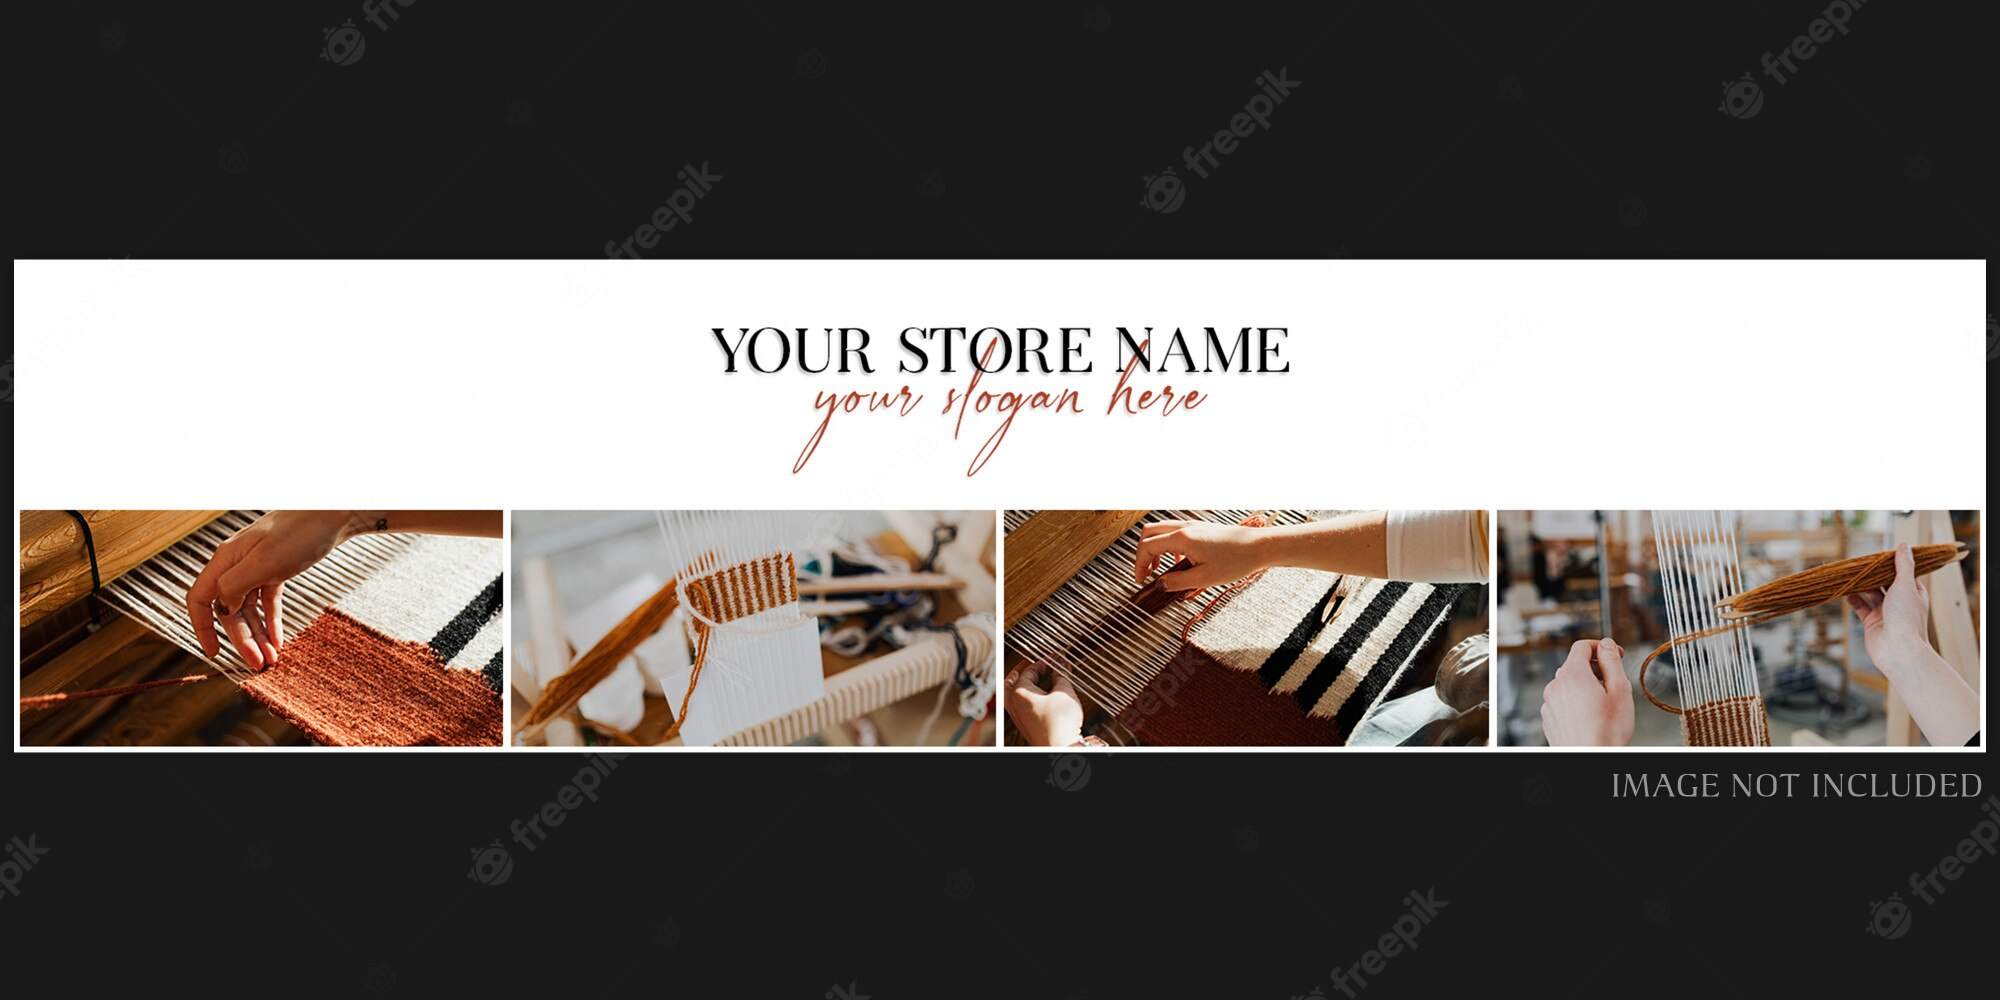 Etsy banner Images  Free Vectors, Stock Photos & PSD Regarding Free Etsy Banner Template